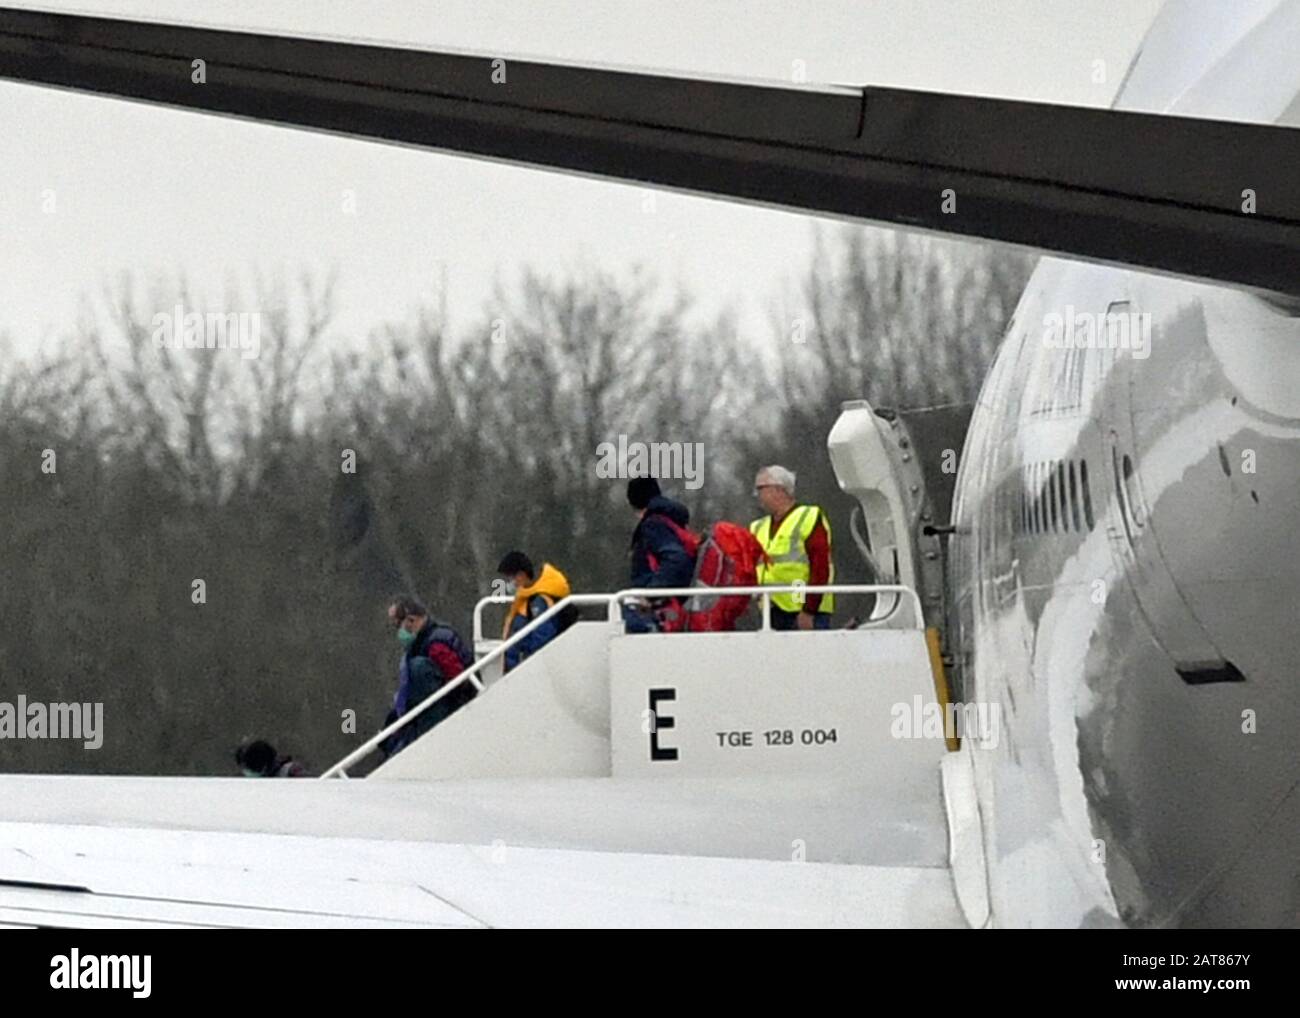 Passengers disembark from the plane carrying British nationals from the coronavirus-hit city of Wuhan in China, arrives at RAF Brize Norton in Oxfordshire. Stock Photo